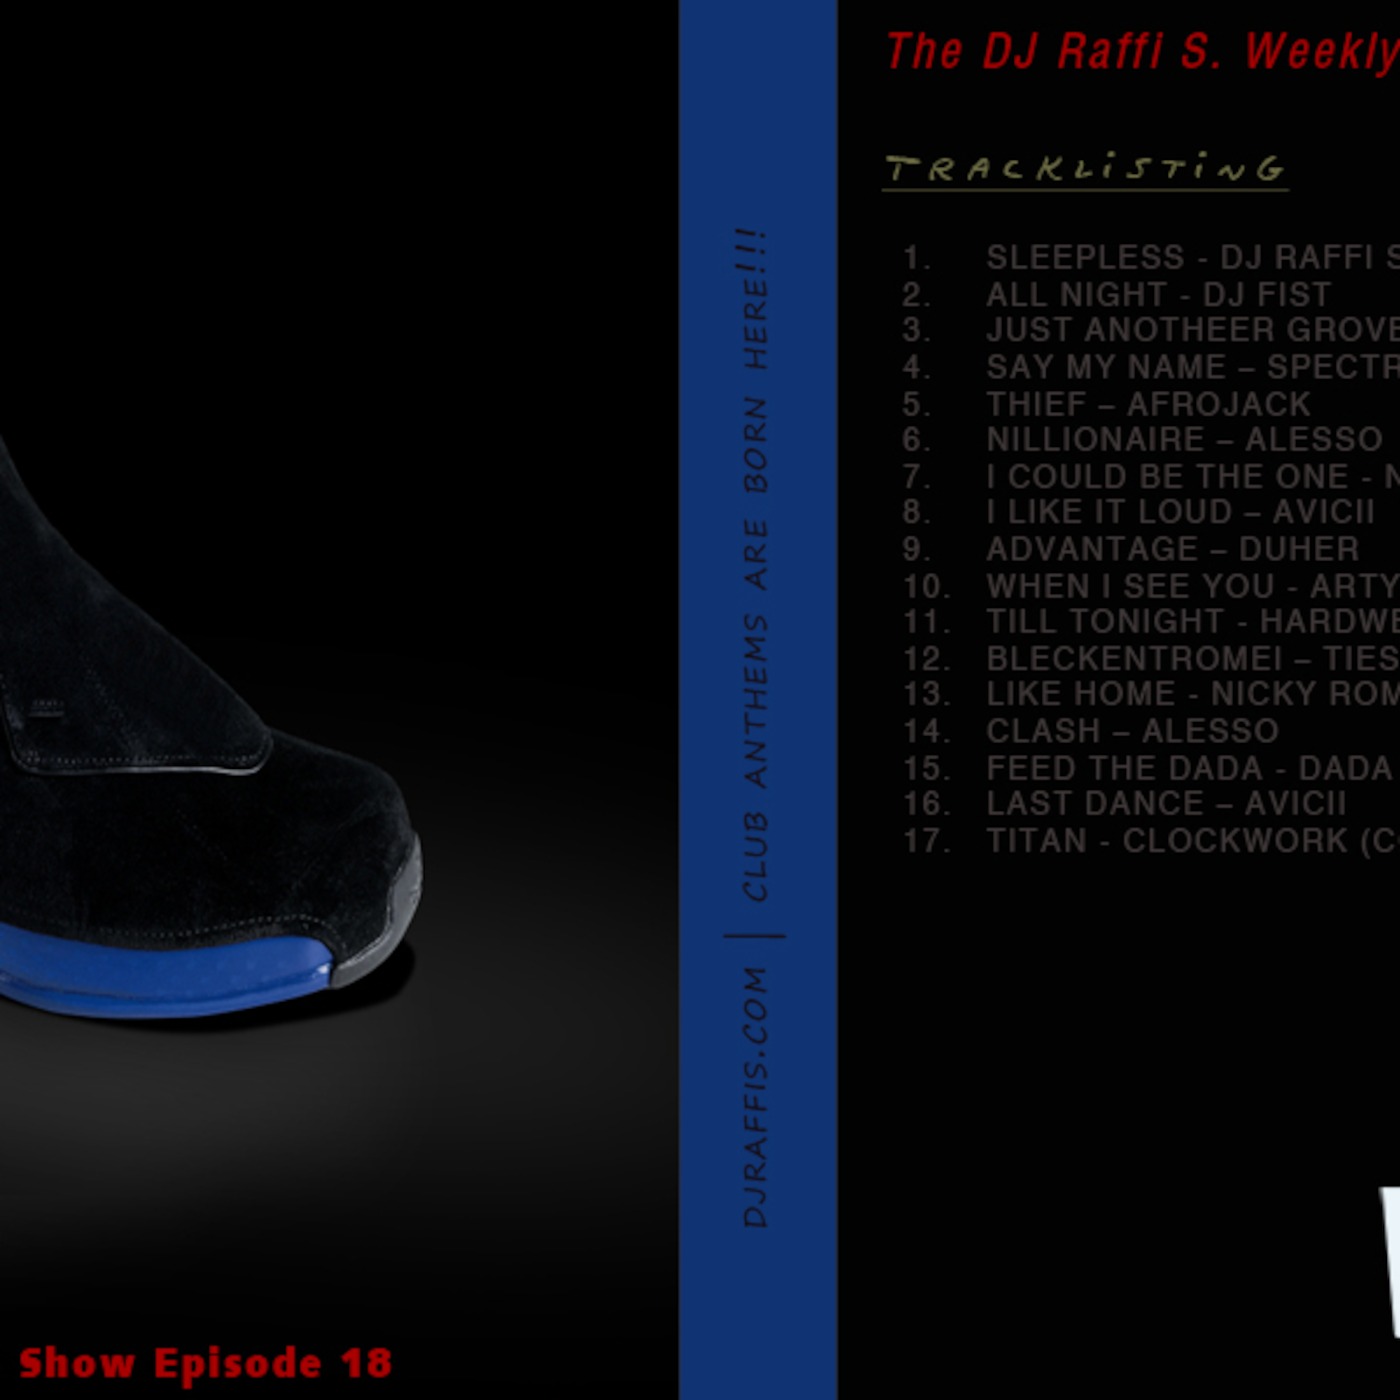 The DJ Raffi S. Weekly Podcast Show - Episode 18